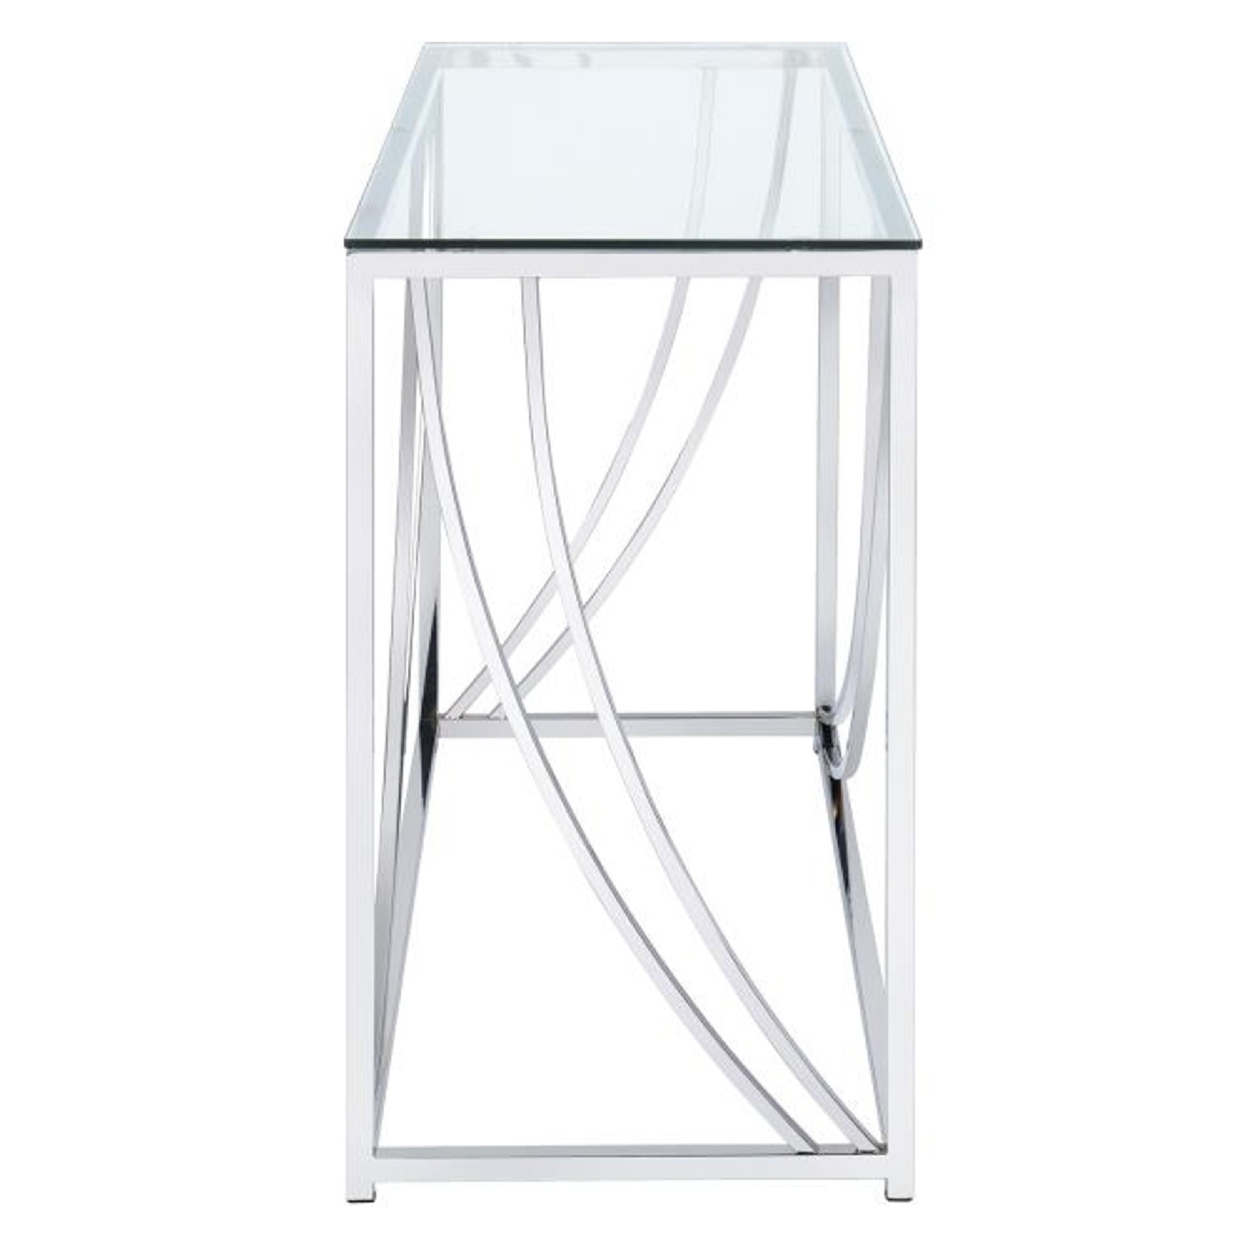 Glass Top Rectangular Sofa Table With Swooping Curves, Clear And Silver- Saltoro Sherpi